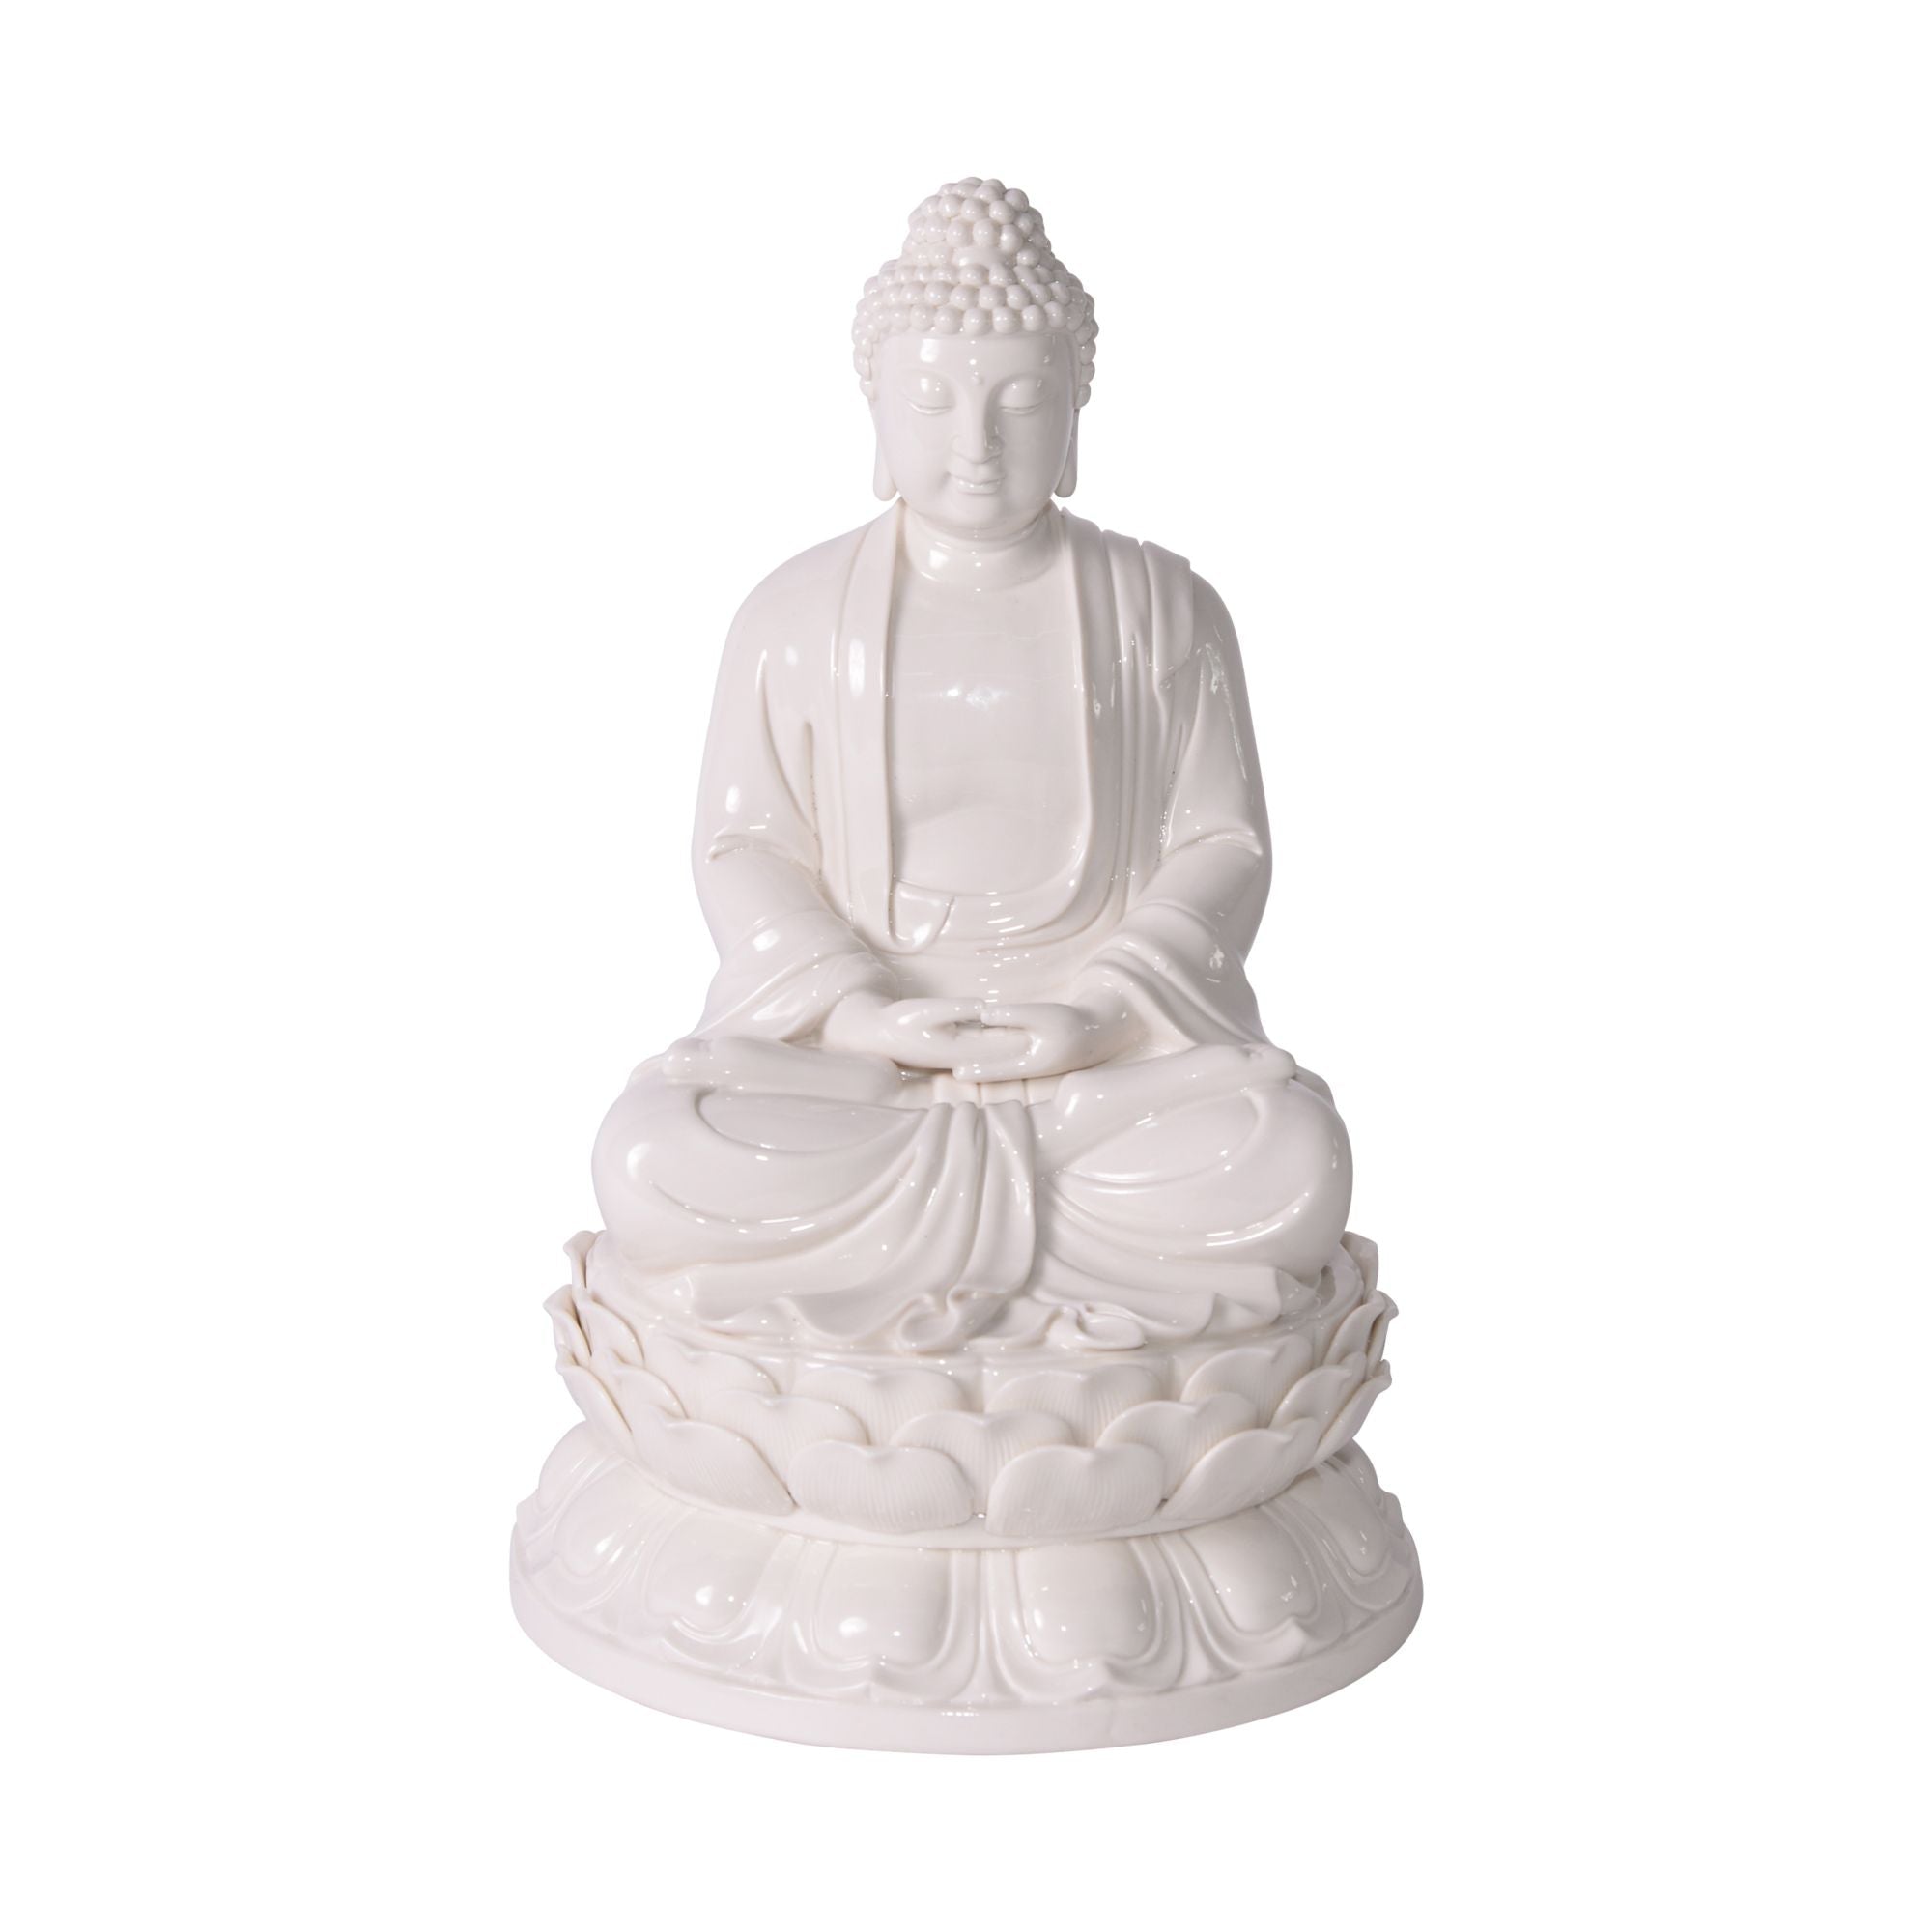 Legend of Asia Giftware Legend of Asia White Porcelain Mediating Buddha Statue